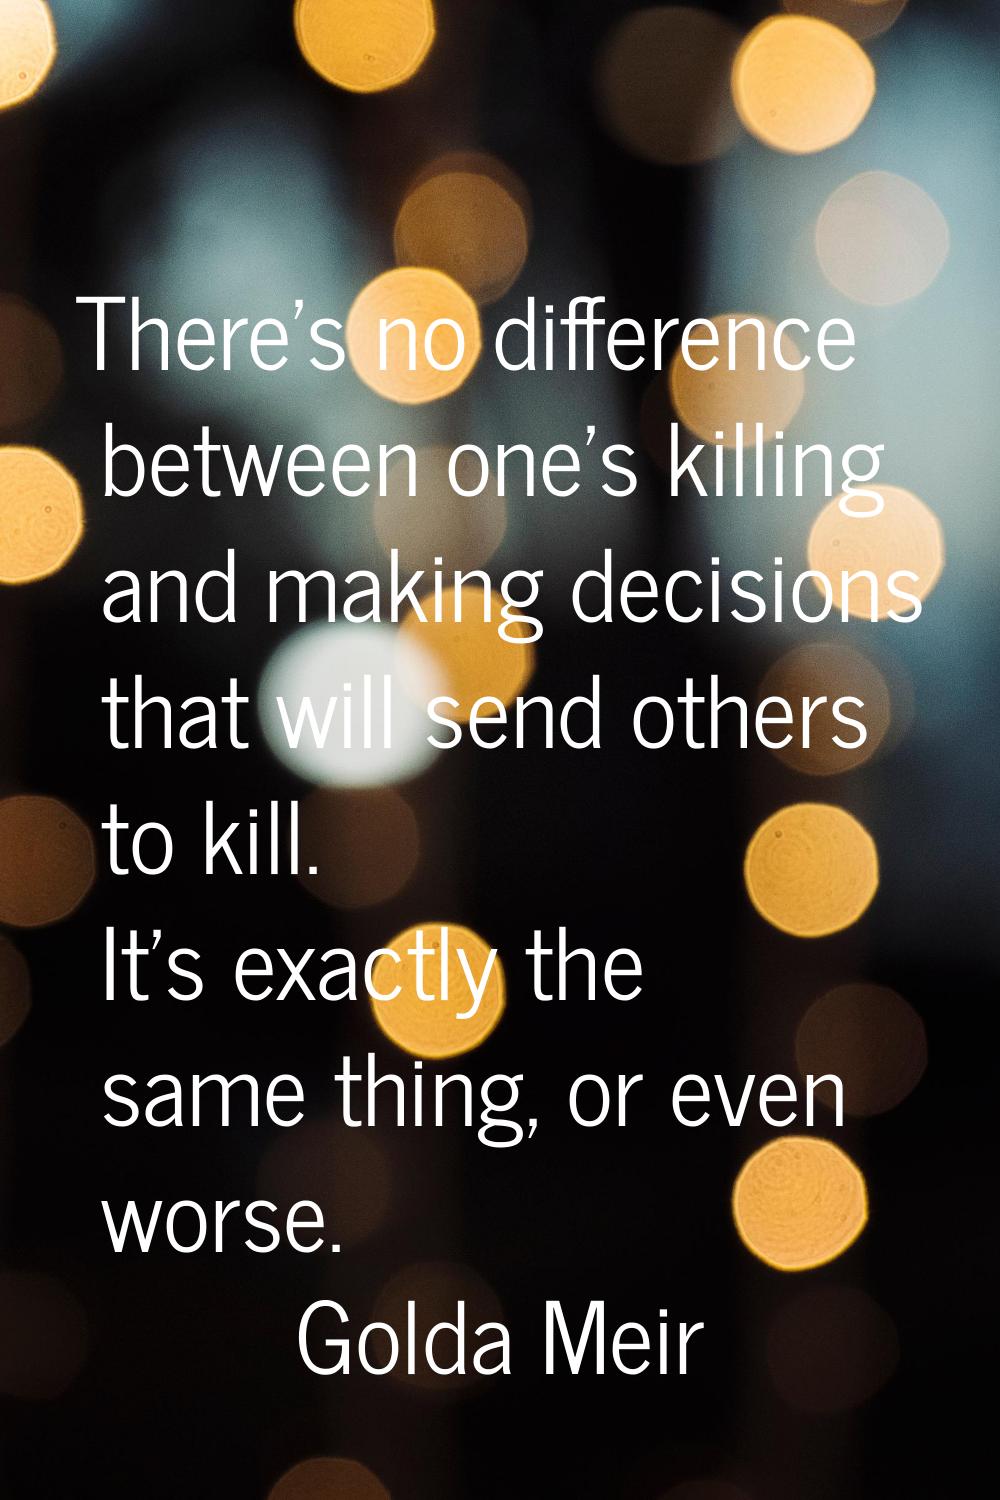 There's no difference between one's killing and making decisions that will send others to kill. It'